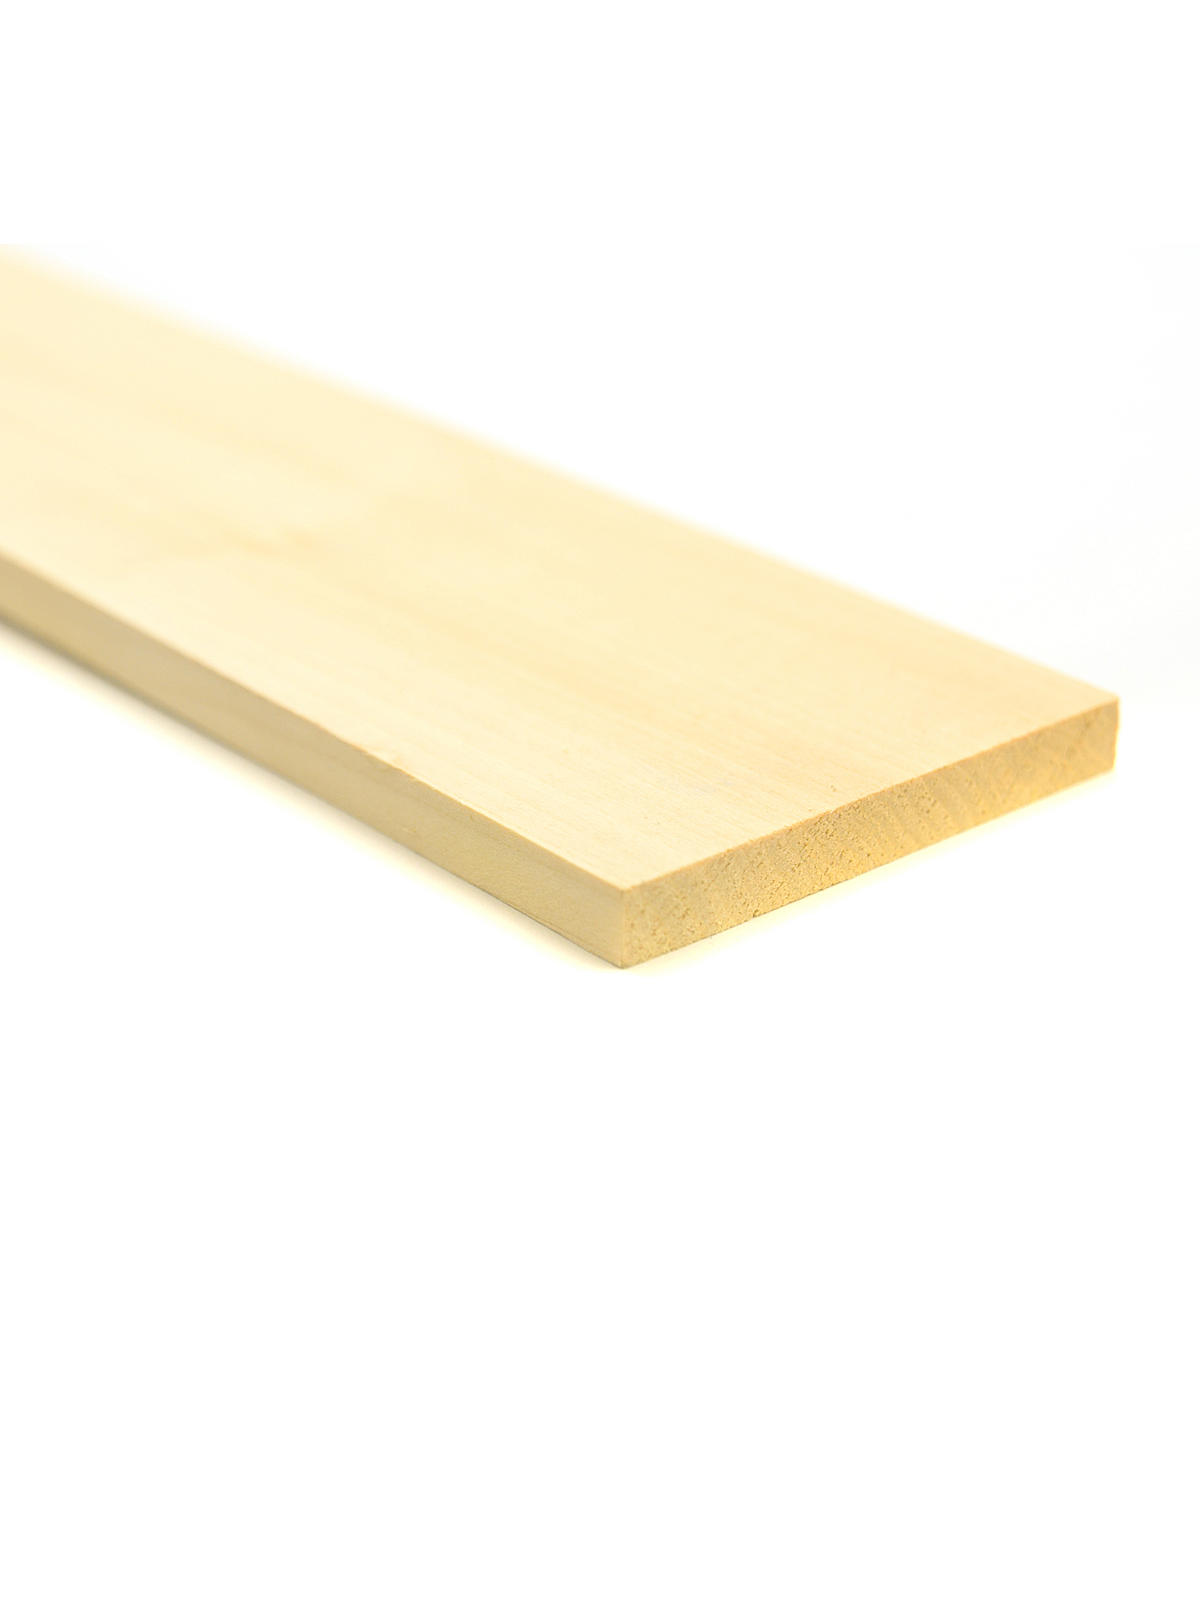 Basswood Sheets 3 8 In. 3 In. X 24 In.